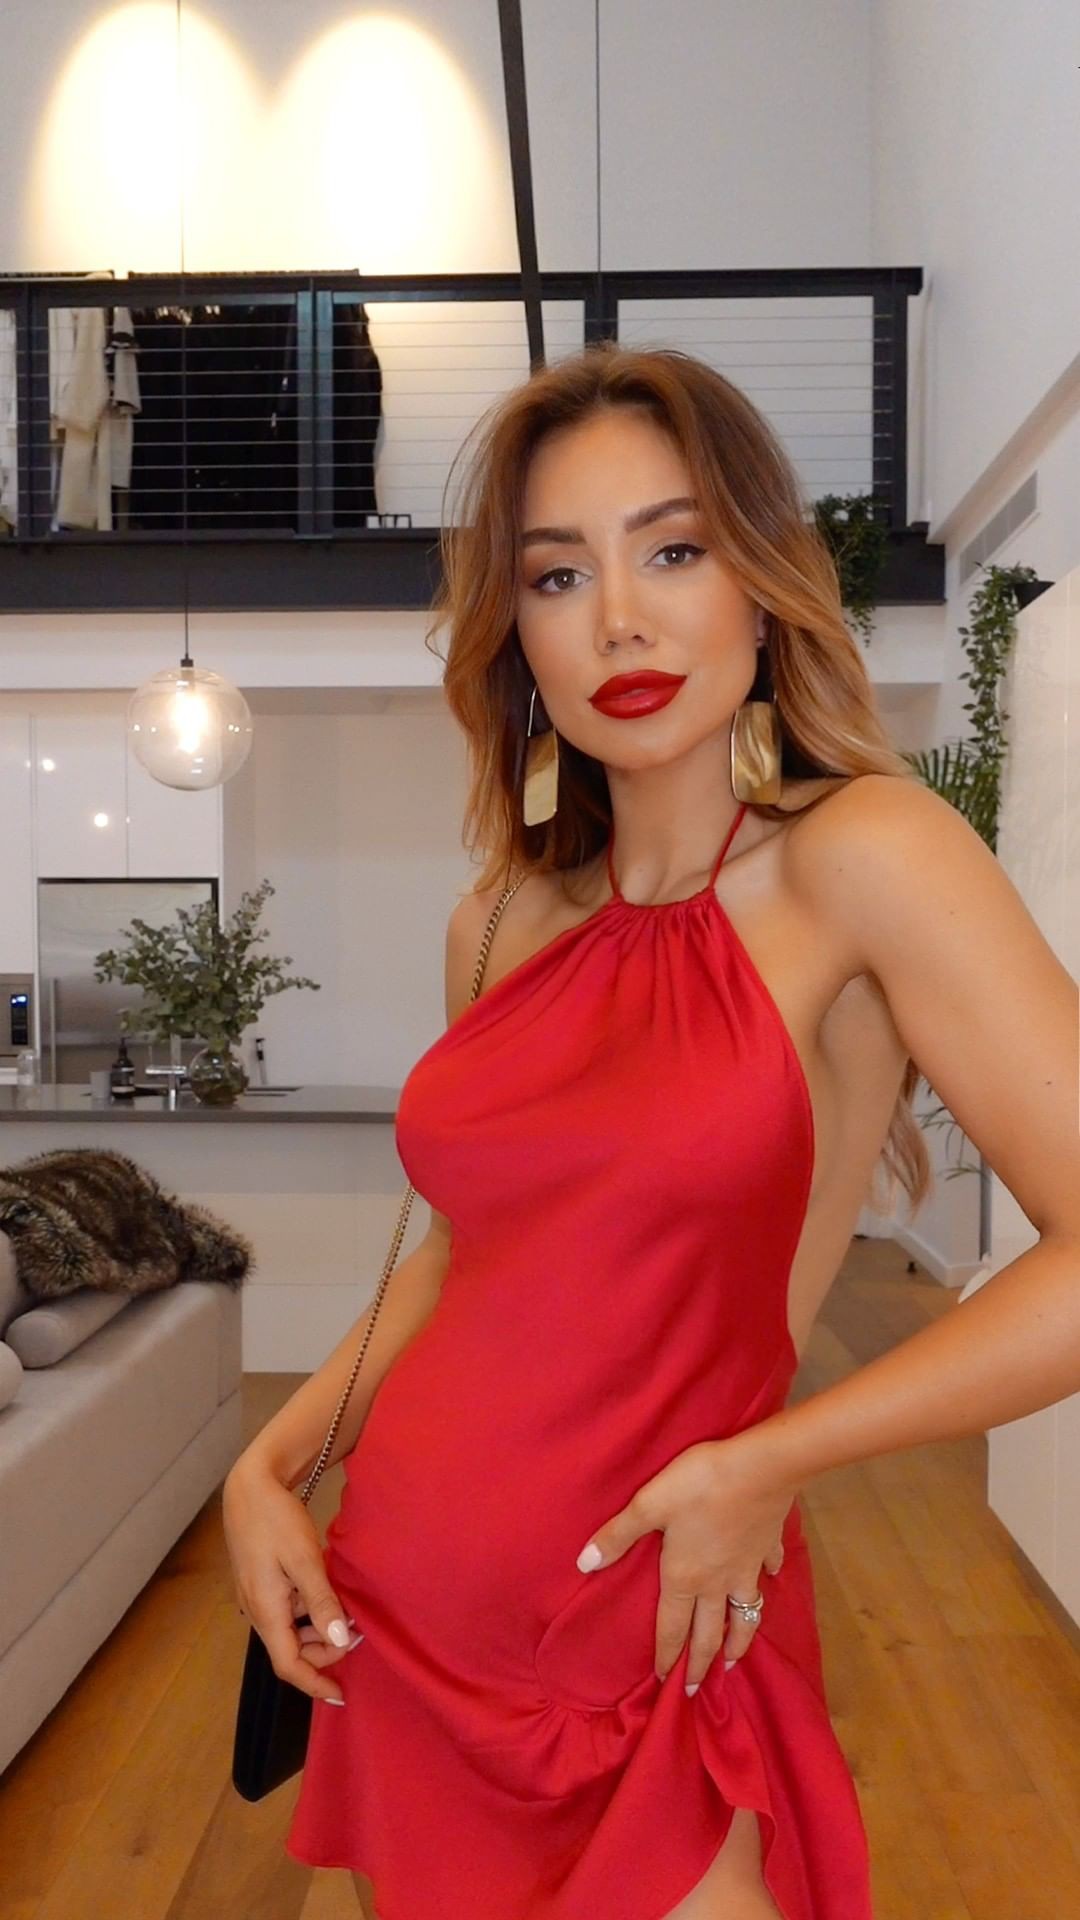 Pia Muehlenbeck cocktail dress for girls, girls photoshoot